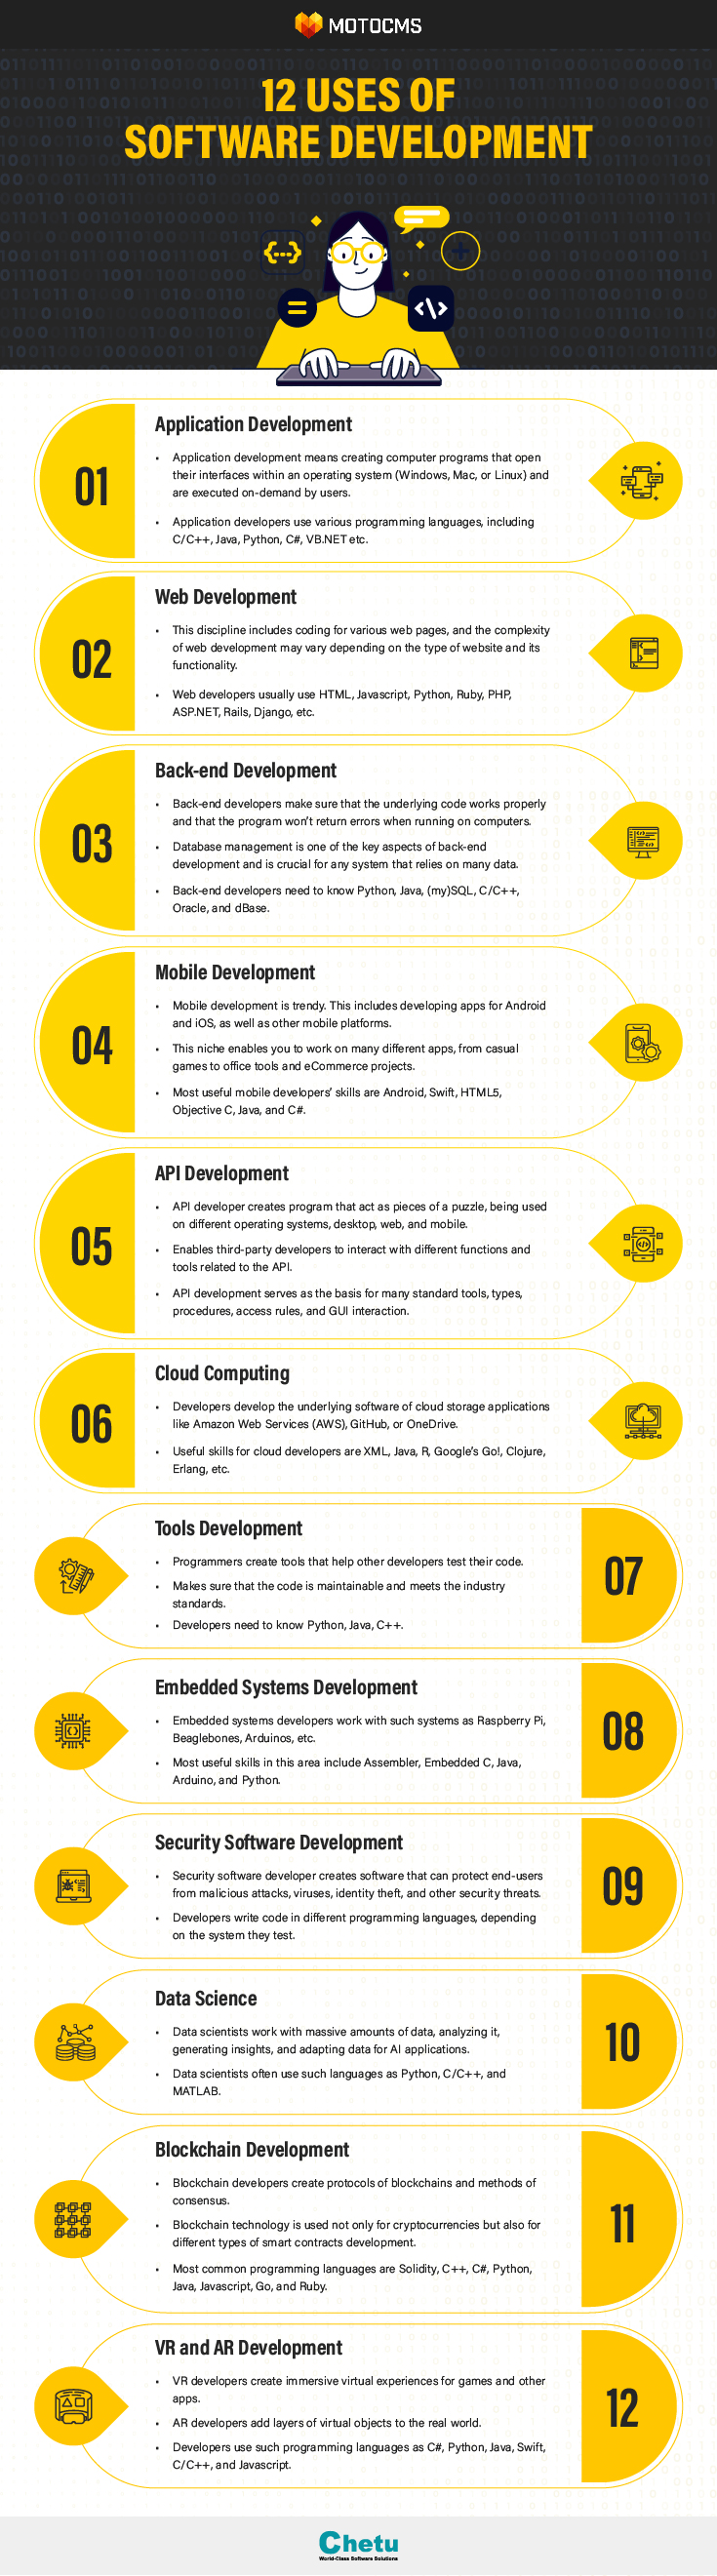 12 Uses of Software Development